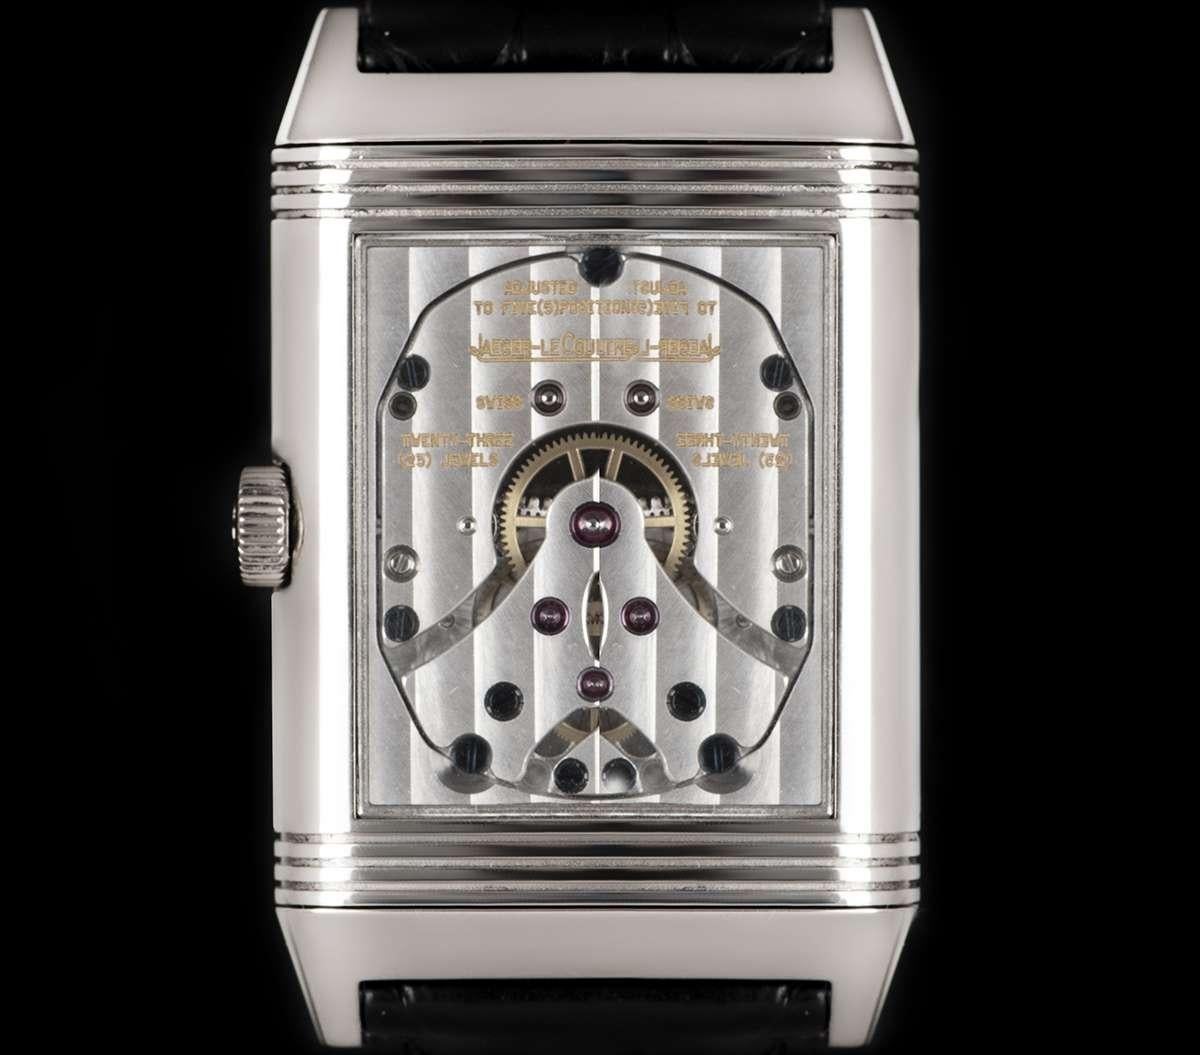 An 18k White Gold Day & Night Reverso Gents Wristwatch, black dial with arabic numbers, day & night indicator at 2 0'clock, small seconds and moonphase at 6 0'clock, 40 hour power reserve indicator at 11 0'clock, reverse side with exhibition